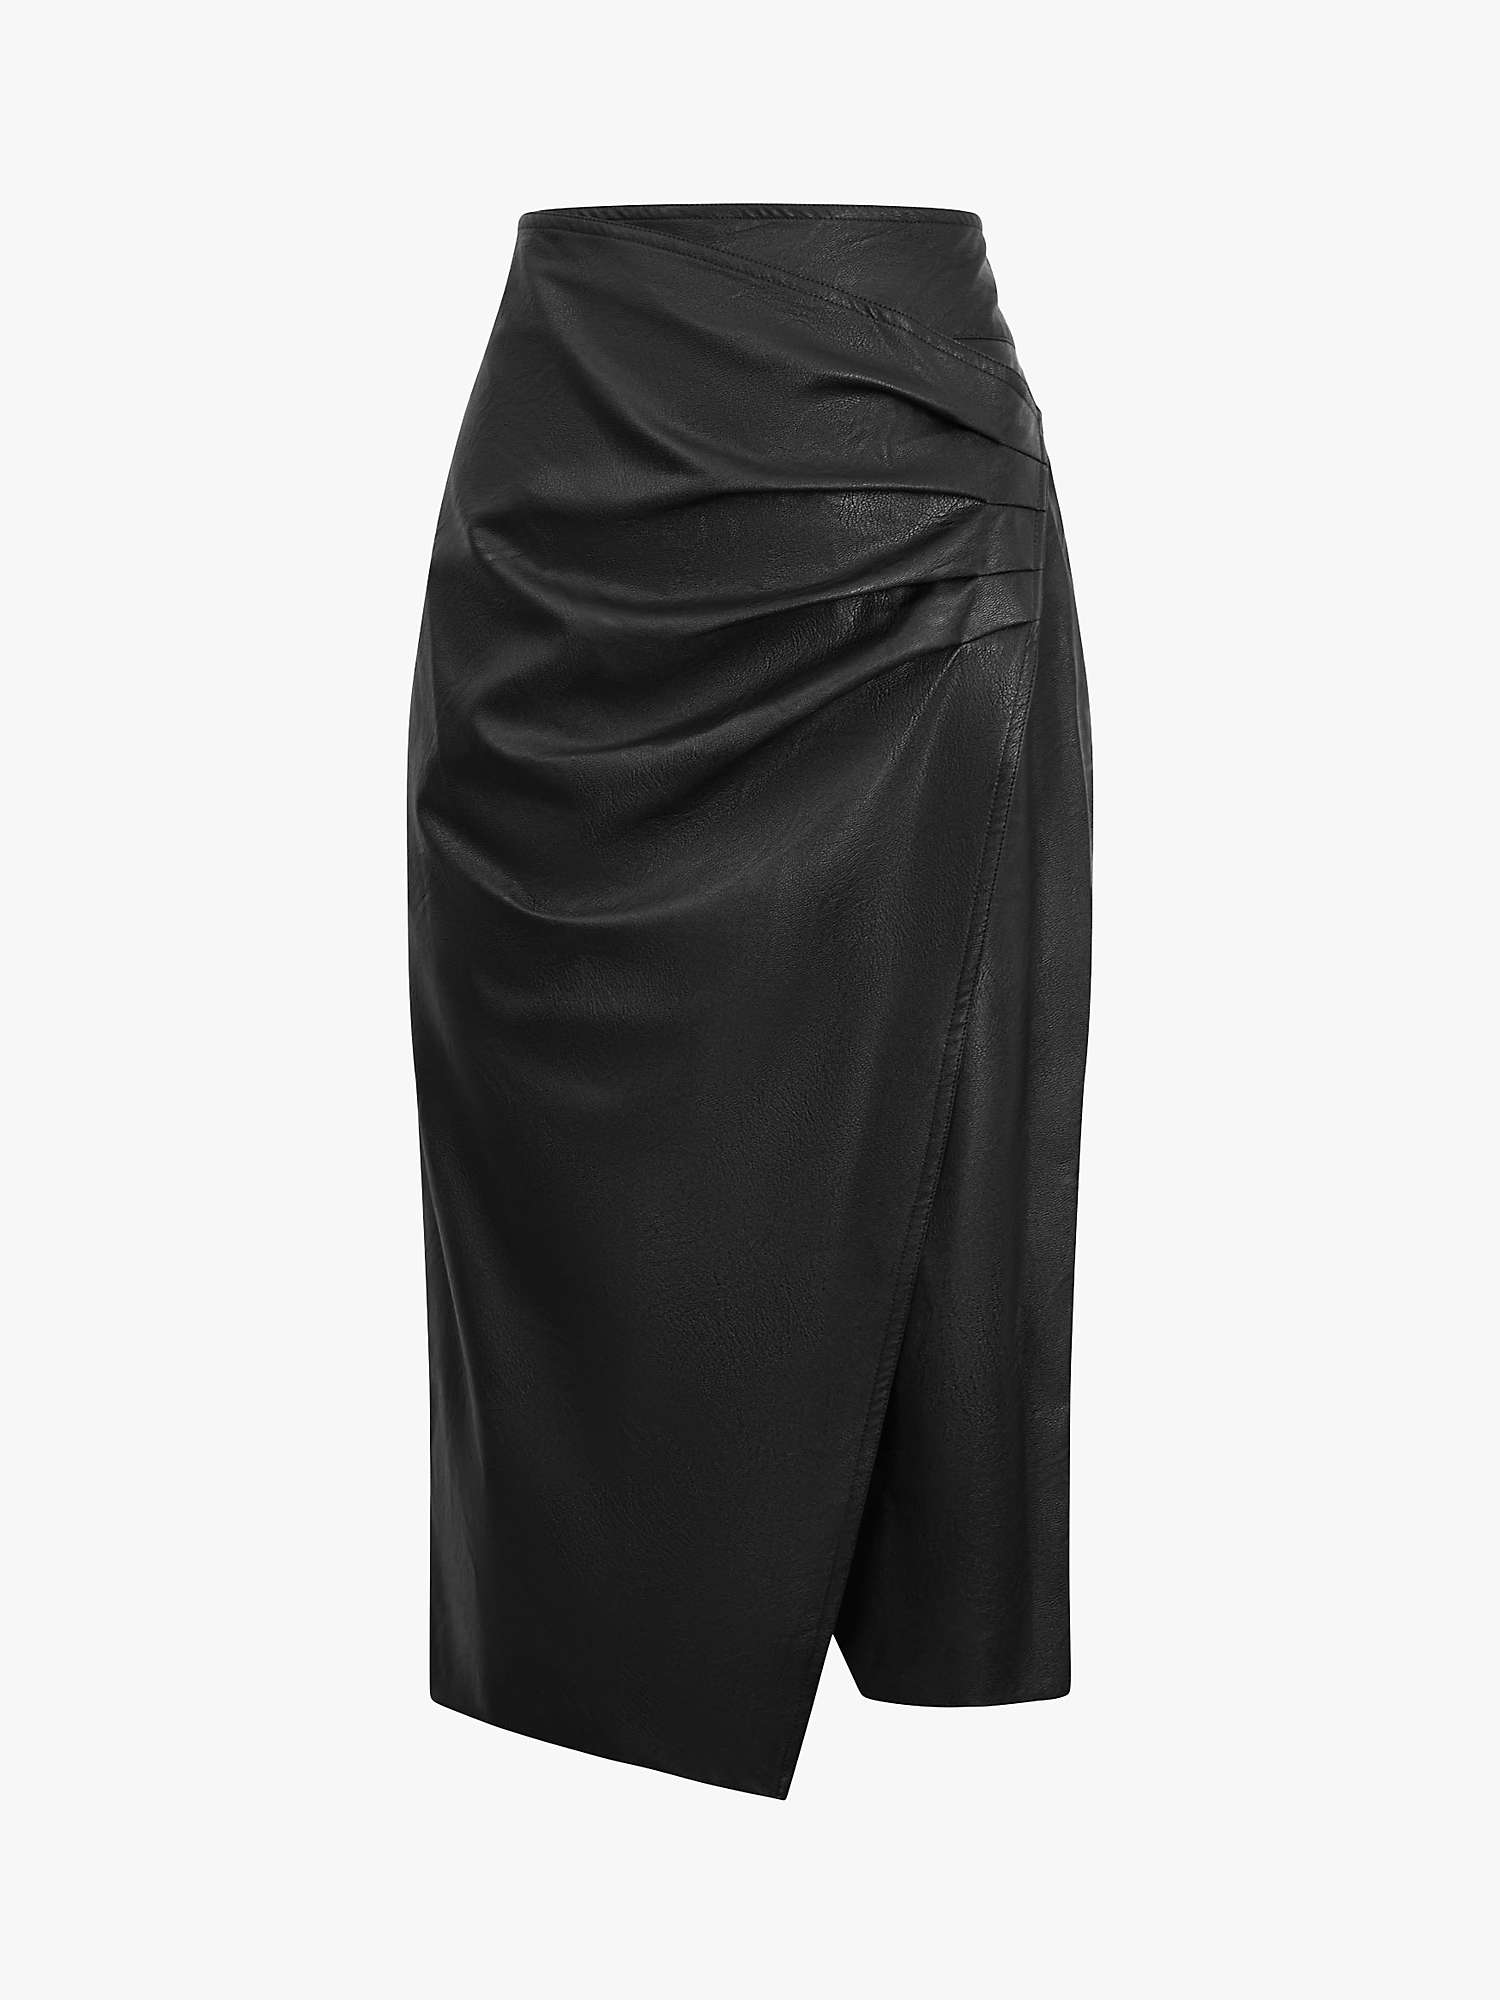 Buy James Lakeland Faux Leather Ruched Midi Skirt Online at johnlewis.com